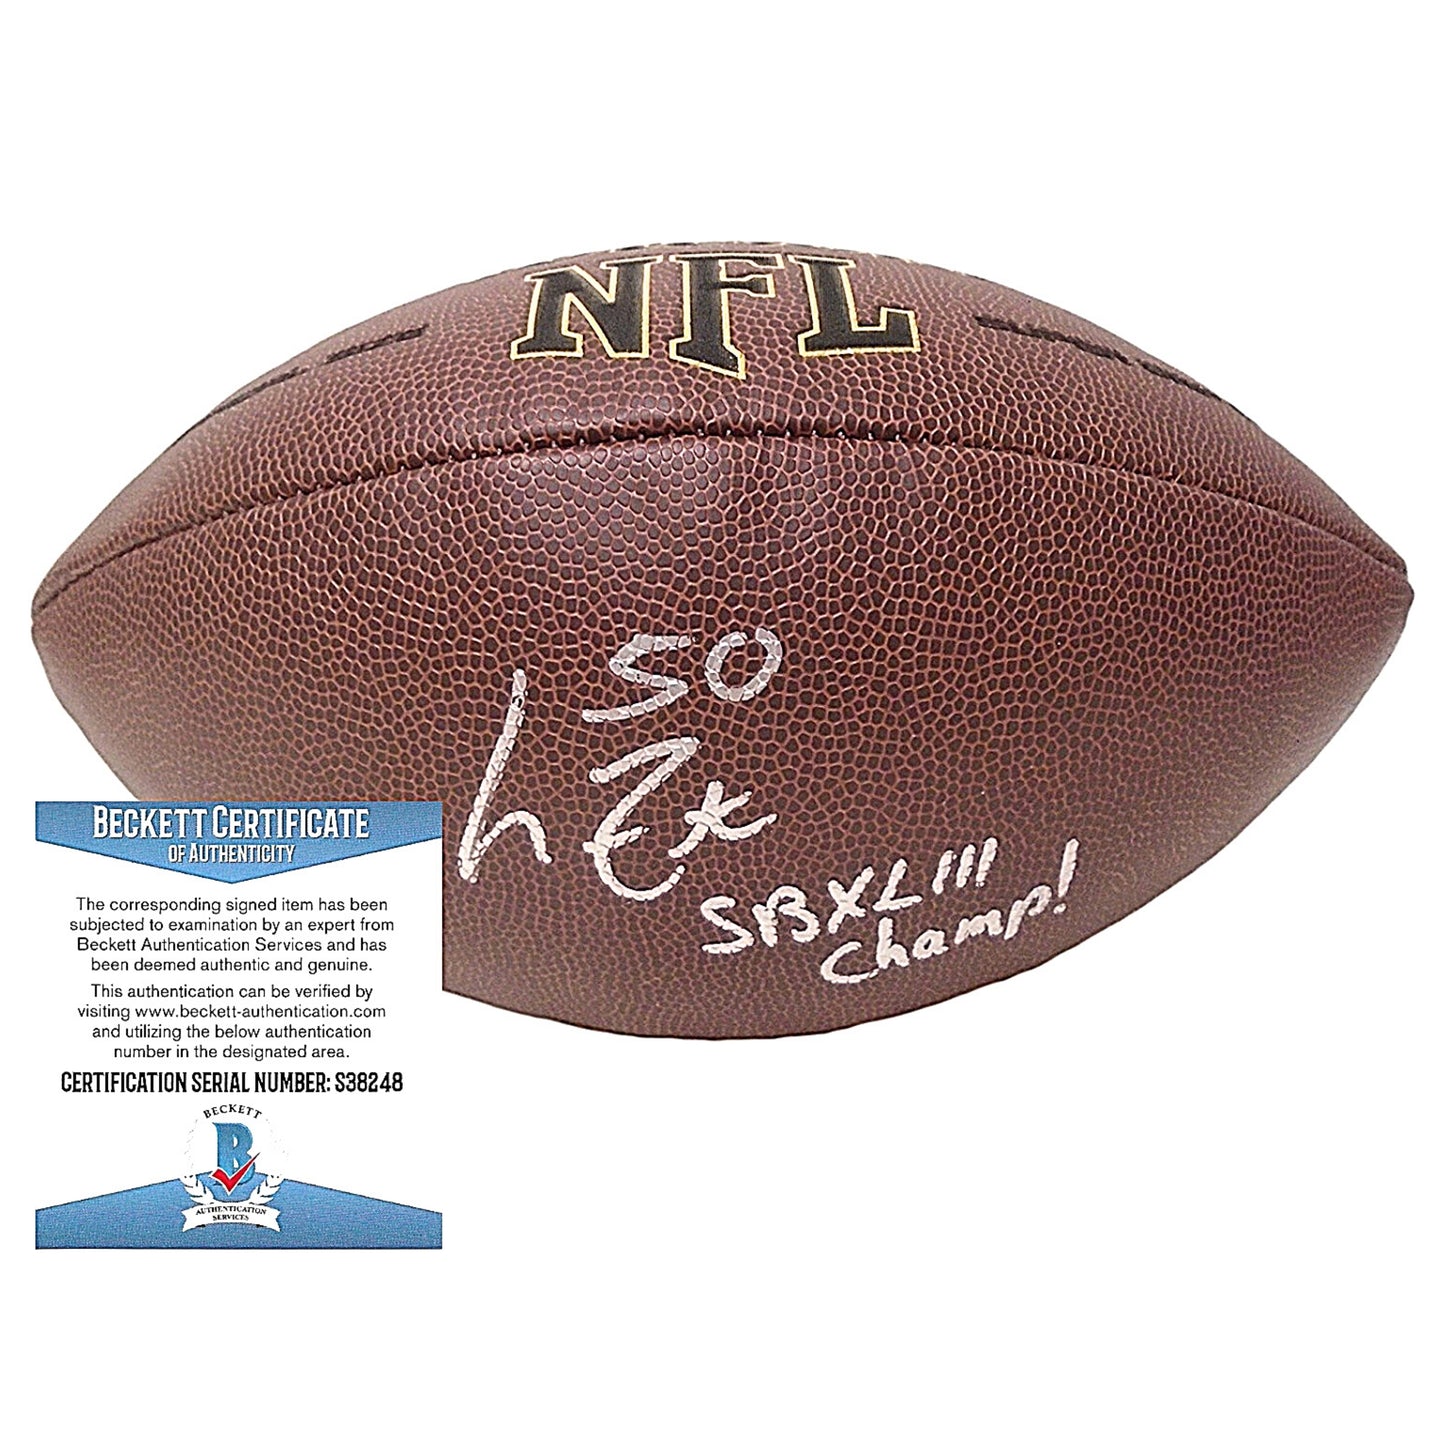 Footballs- Autographed- Larry Foote Signed NFL Wilson Composite Football - Pittsburgh Steelers - Proof Photo - Beckett BAS Authentication 101